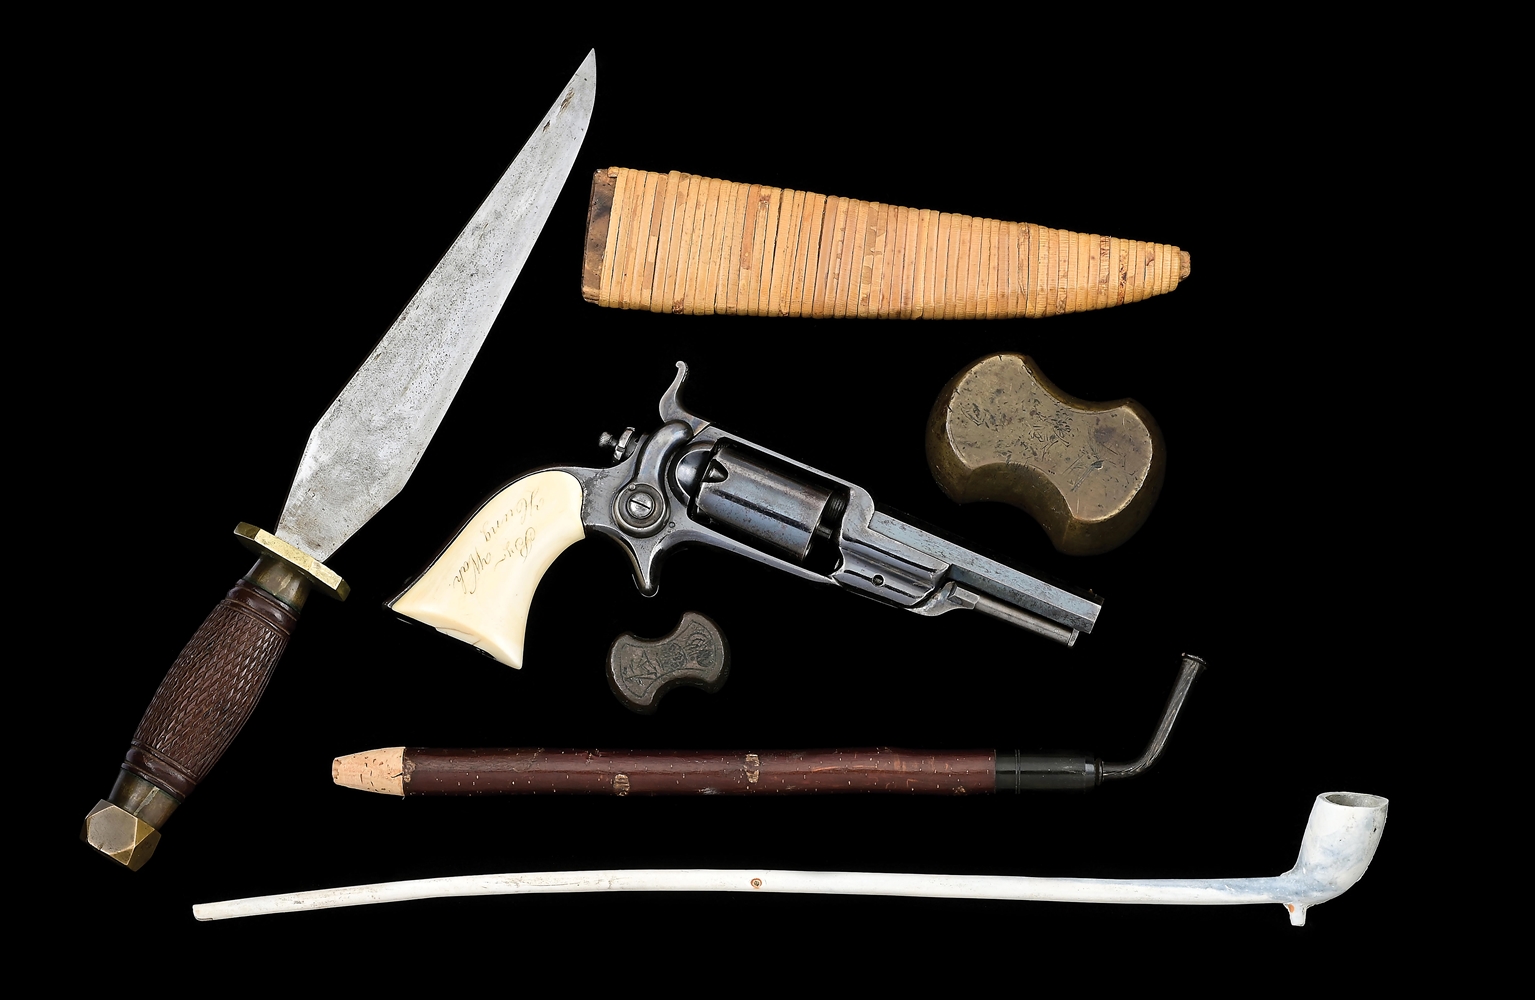 (A) COLT MODEL 1855 ROOT SINGLE ACTION PERCUSSION REVOLVER WITH IVORY INSCRIBED GRIPS TO "WM OSBORN" BY HUNG WAH.